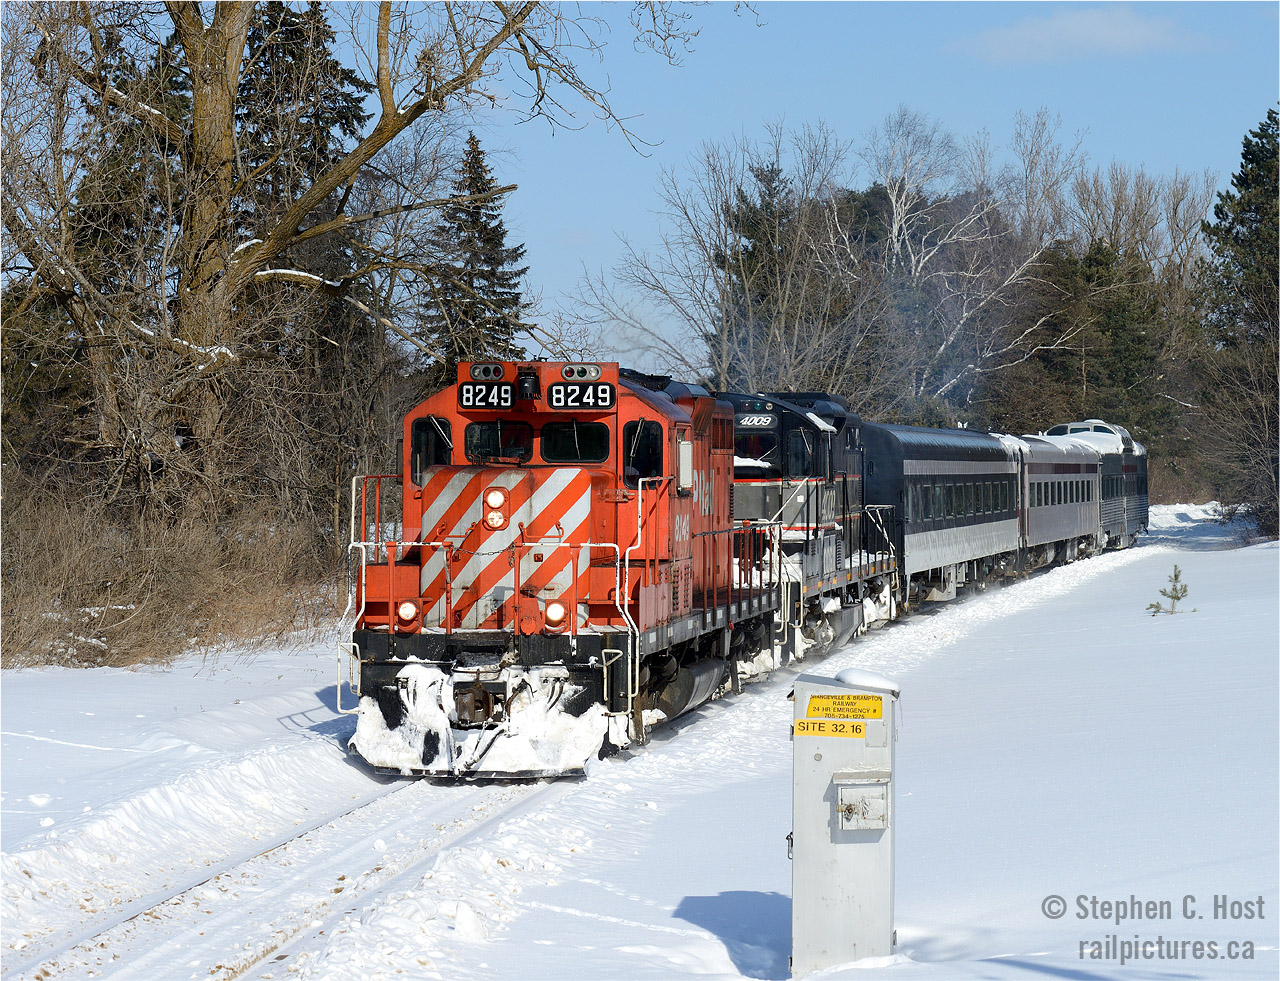 Having departed Orangeville, the Orangeville-Brampton Railway's Credit Valley Express snow train accelerates to track speed with the last CP GP9 to survive on the CP roster, 8249 in the charge.